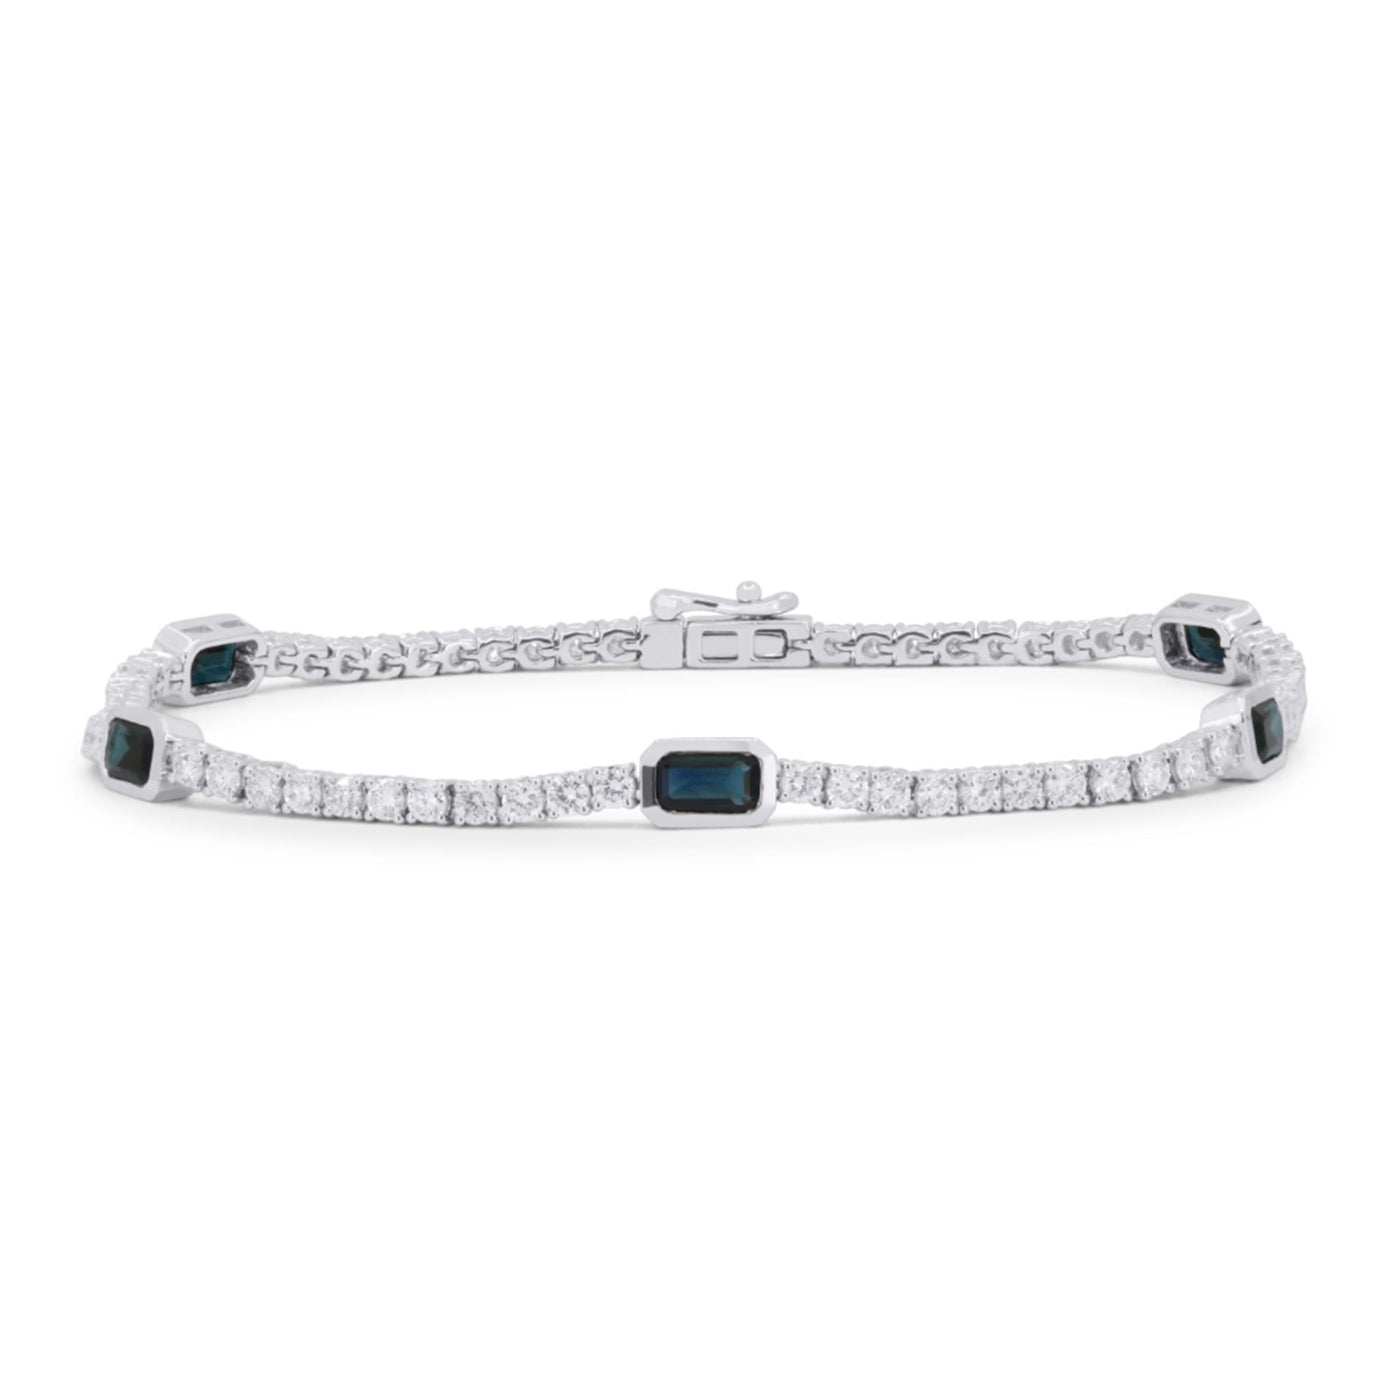 14K White Gold 7" Fancy Tennis Style Bracelet Featuring Sapphires and Diamonds